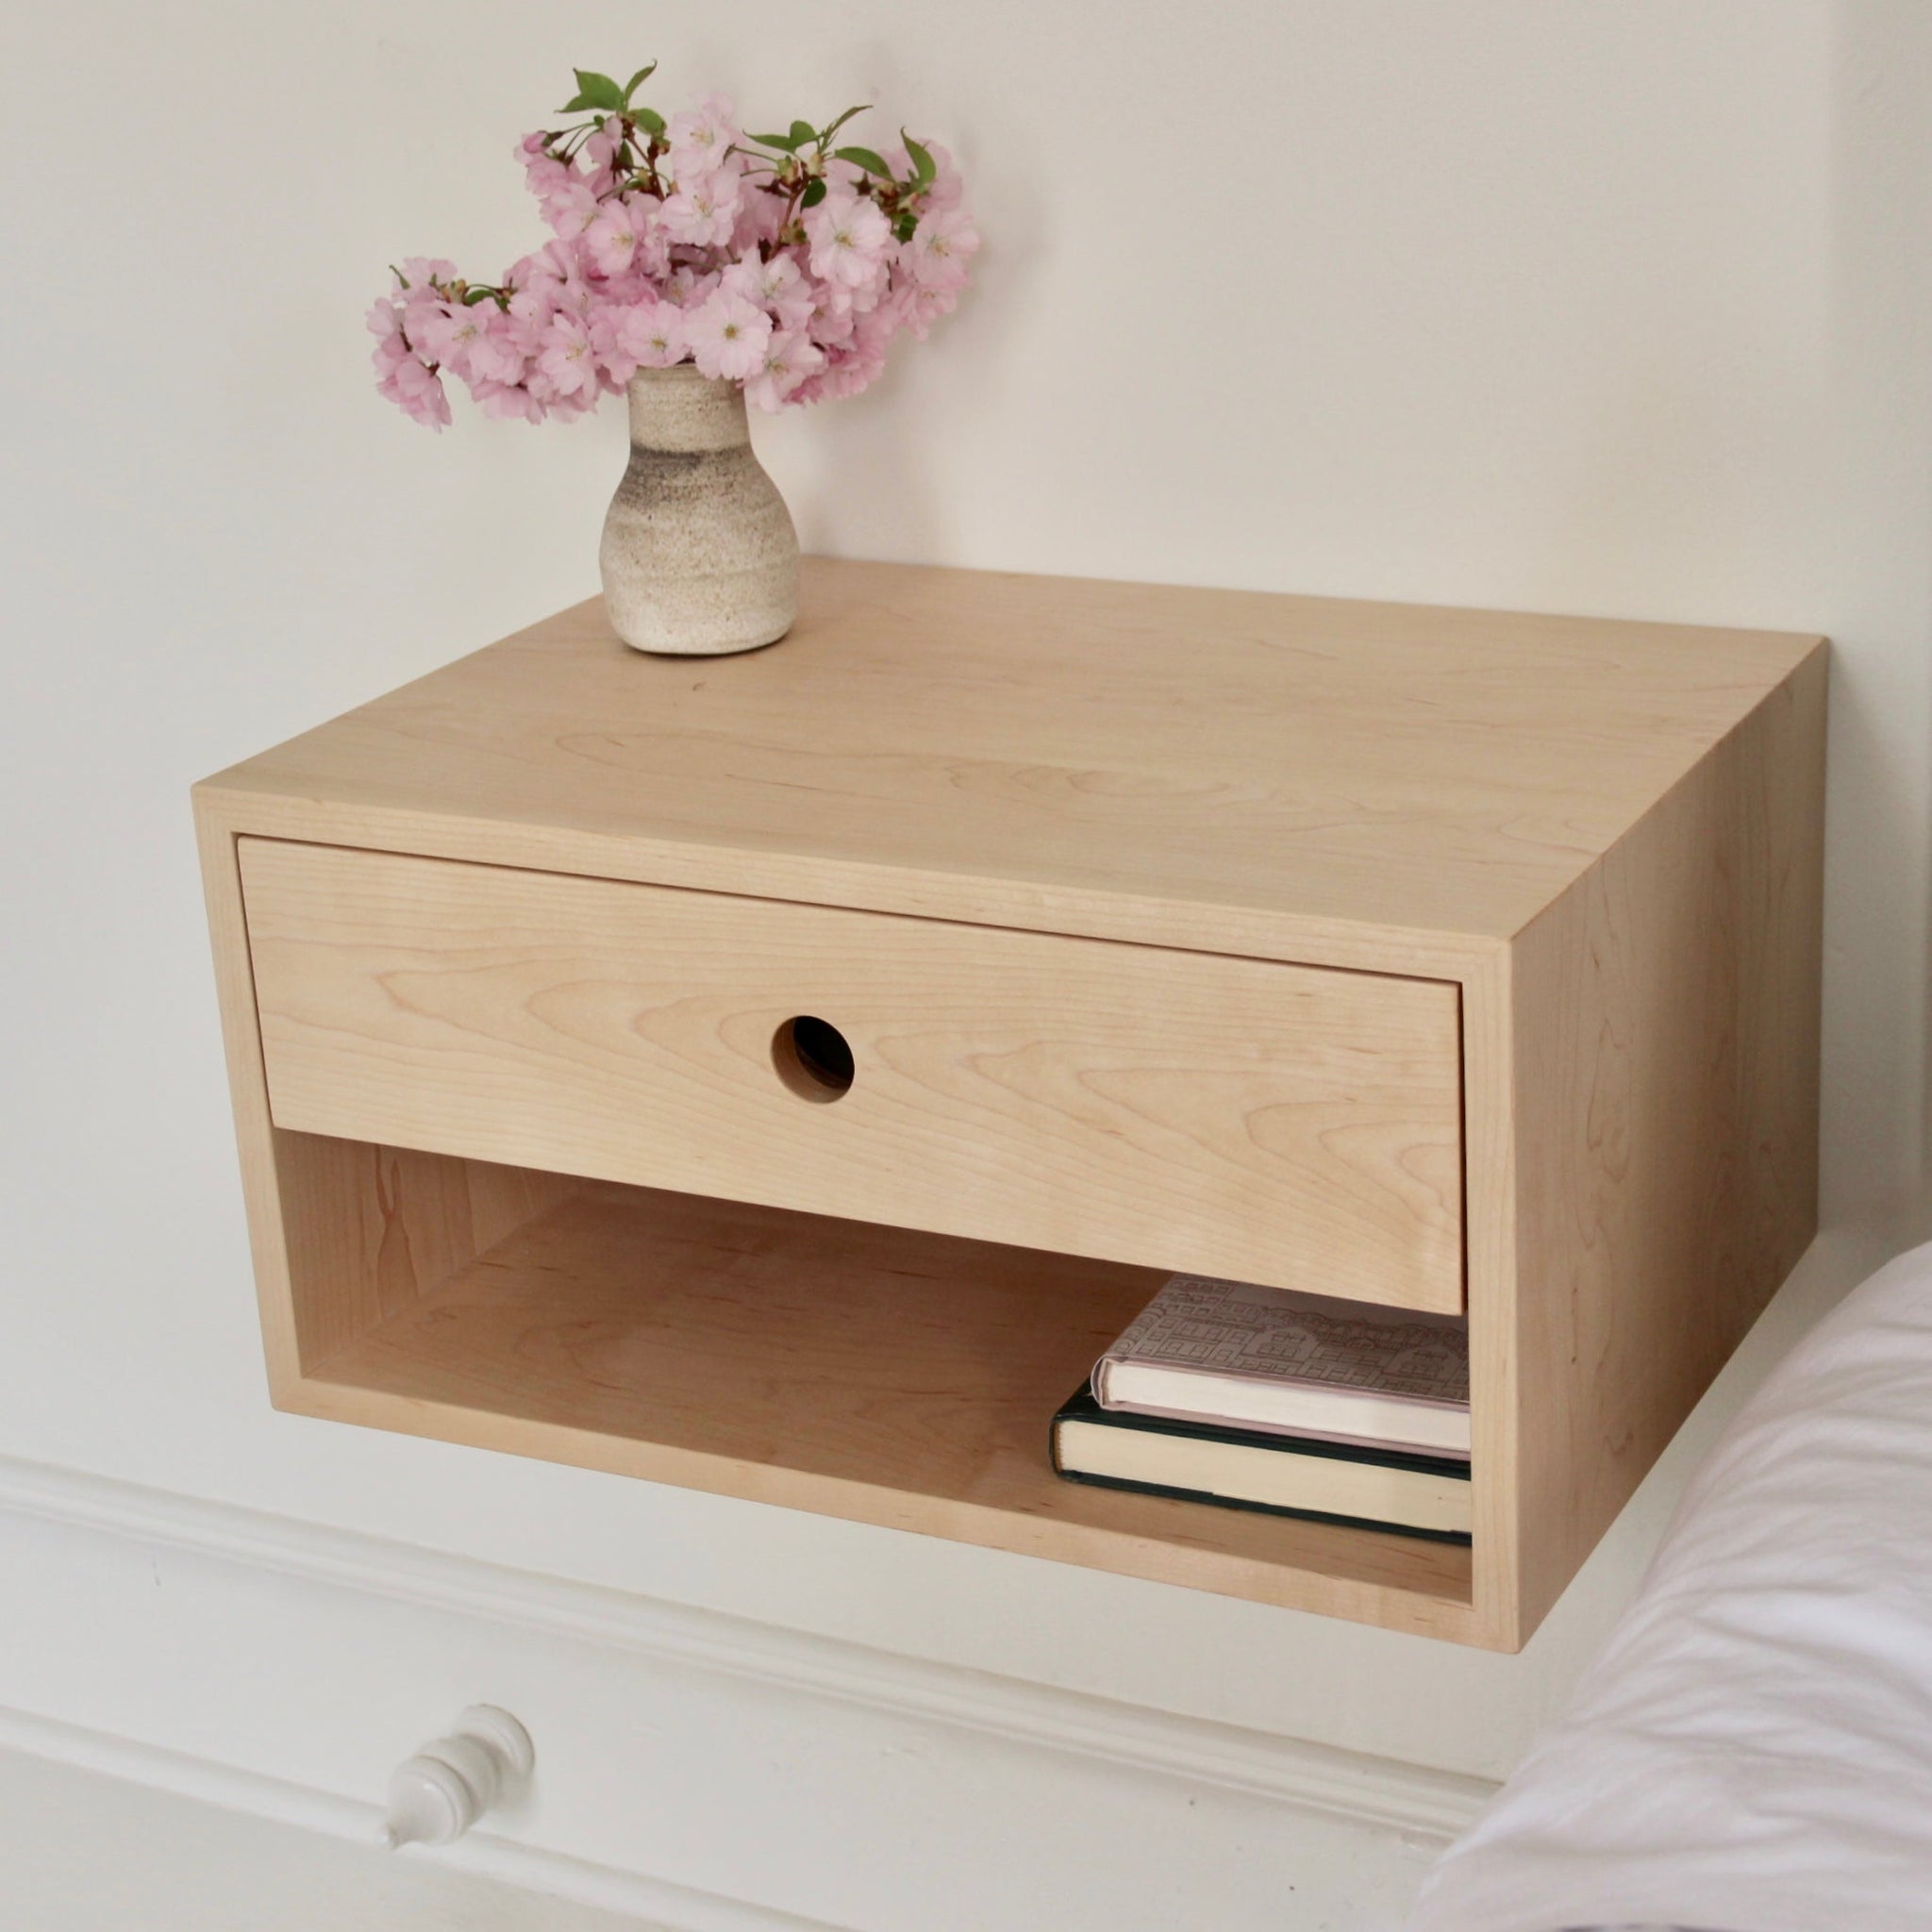 Double Tall Floating Nightstand in Maple - Krøvel Furniture Co. Handmade in Maine